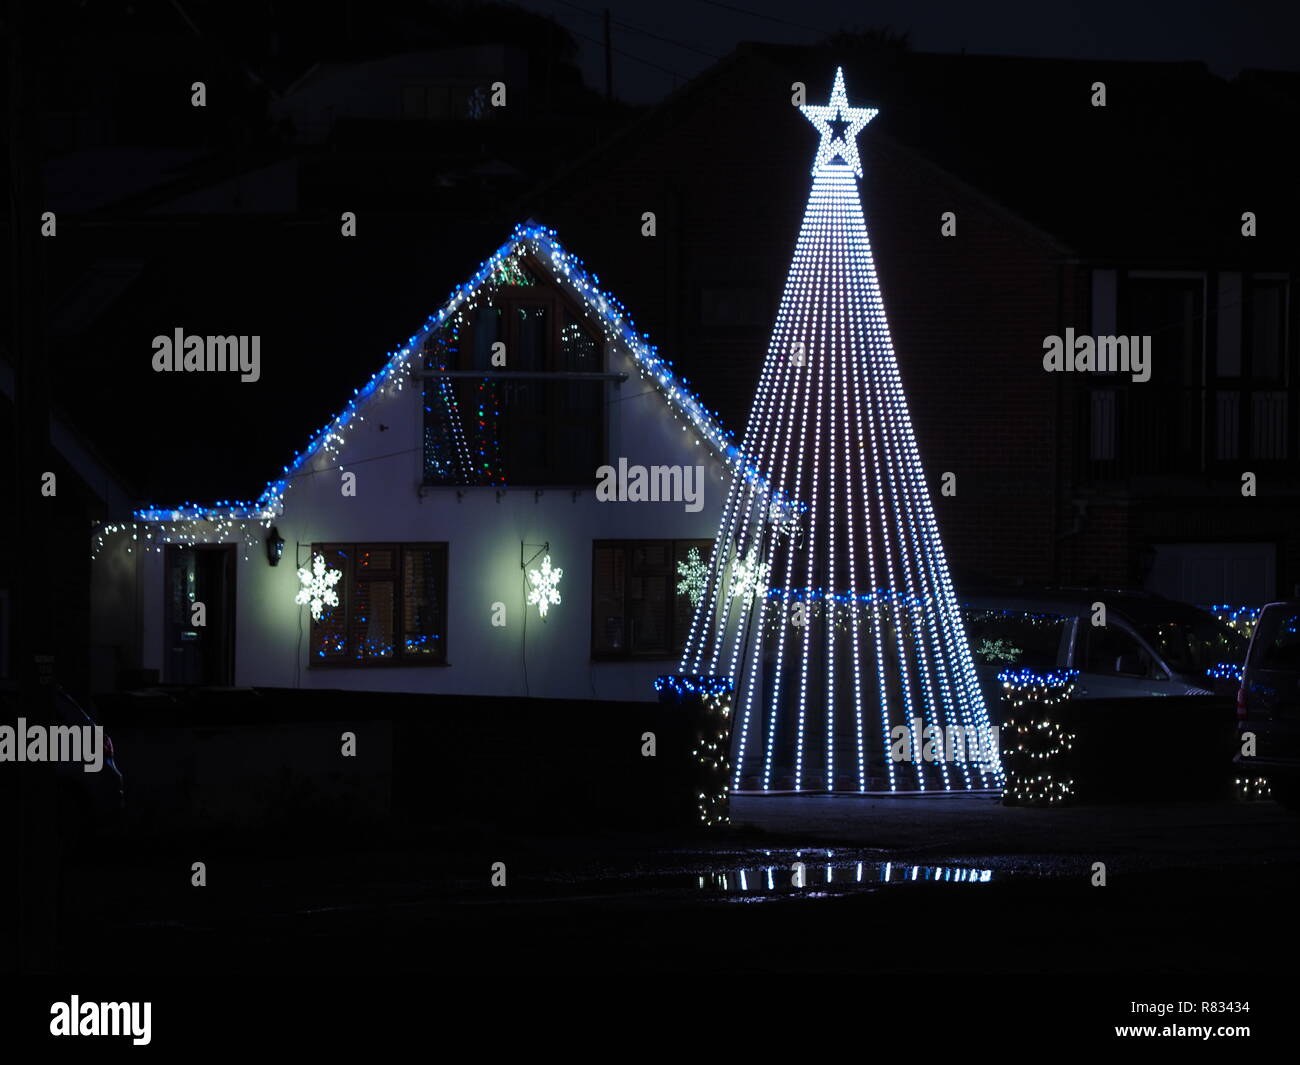 Warden Bay, Kent, UK. 12th December, 2018. A house in Warden Bay, Kent features an impressive Christmas lighting display featuring a huge Christmas Tree (taller than the property) and covered in computer controlled lights that run through various patterns. The display is well known locally as the Jetty Road Christmas Lights. Credit: James Bell/Alamy Live News Stock Photo